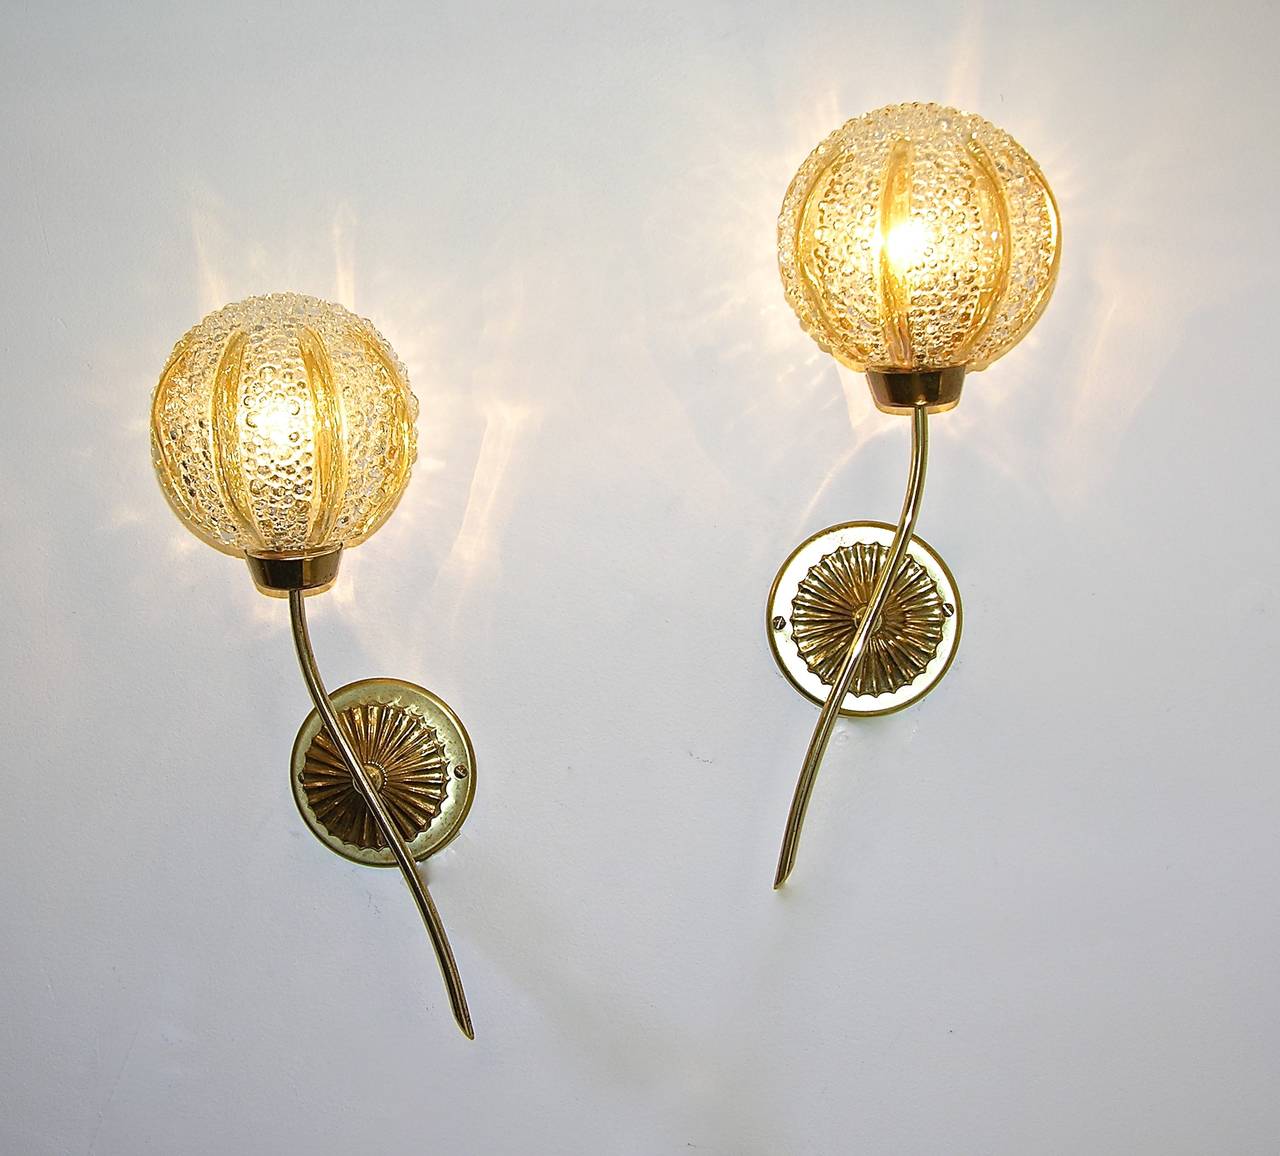 Whimsical pair of wall lights by Barovier, the Murano glass spheres are worked with a texture in relief and decorated with delicately gilded vertical outlines supported by a handmade bronze branch mounted on a round chased plaque.